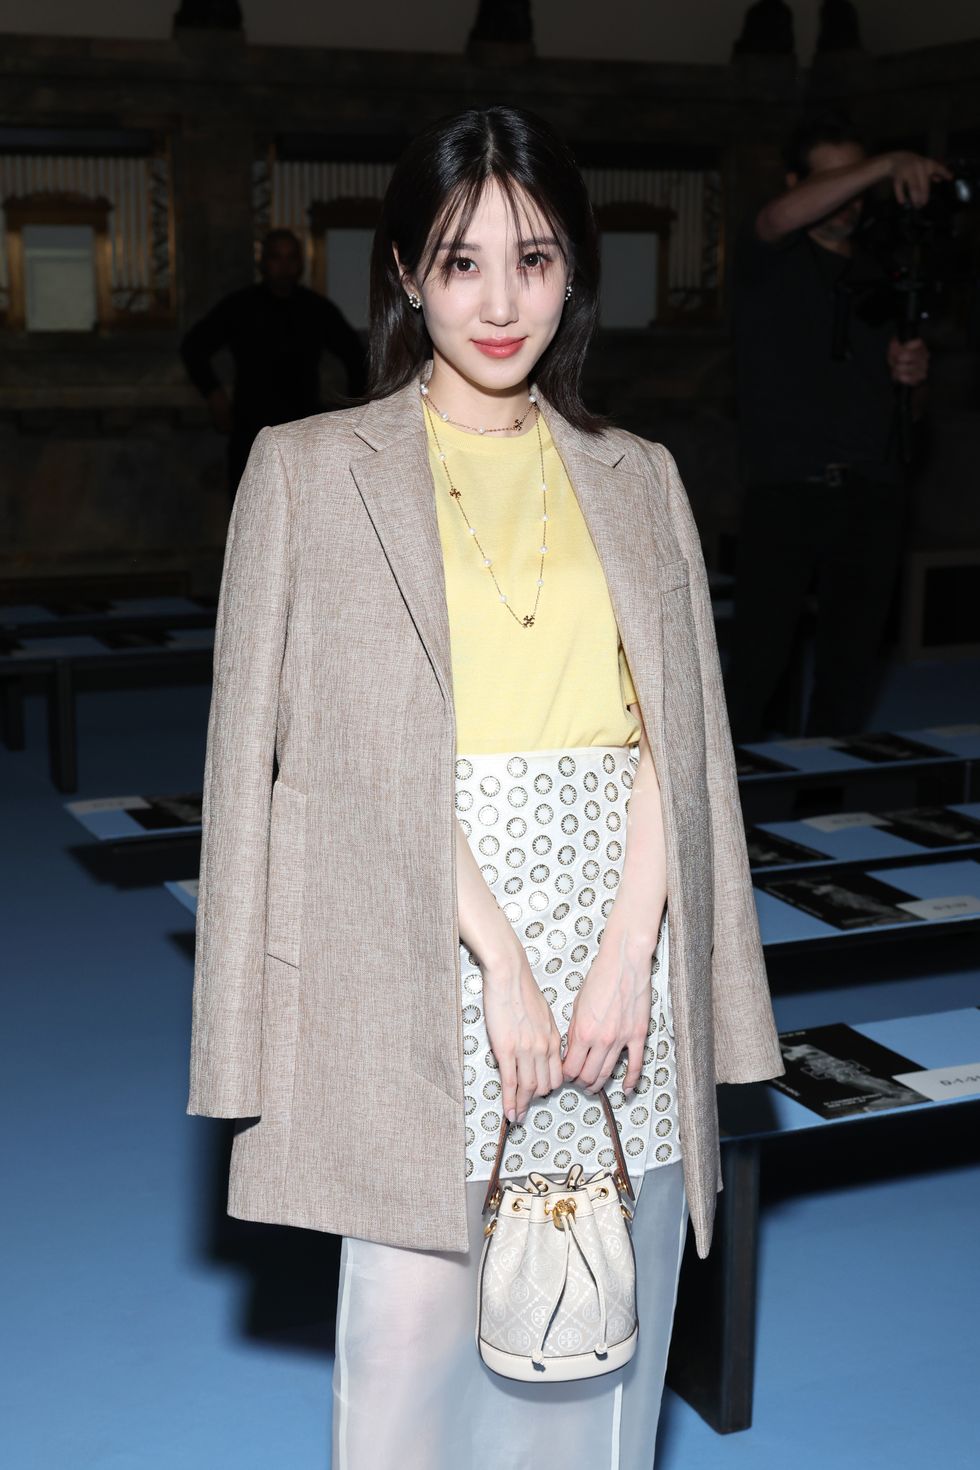 new york, new york february 13 eun bin park attends the tory burch fallwinter 2023 new york fashion week show on february 13, 2023 in new york city photo by cindy ordgetty images for tory burch